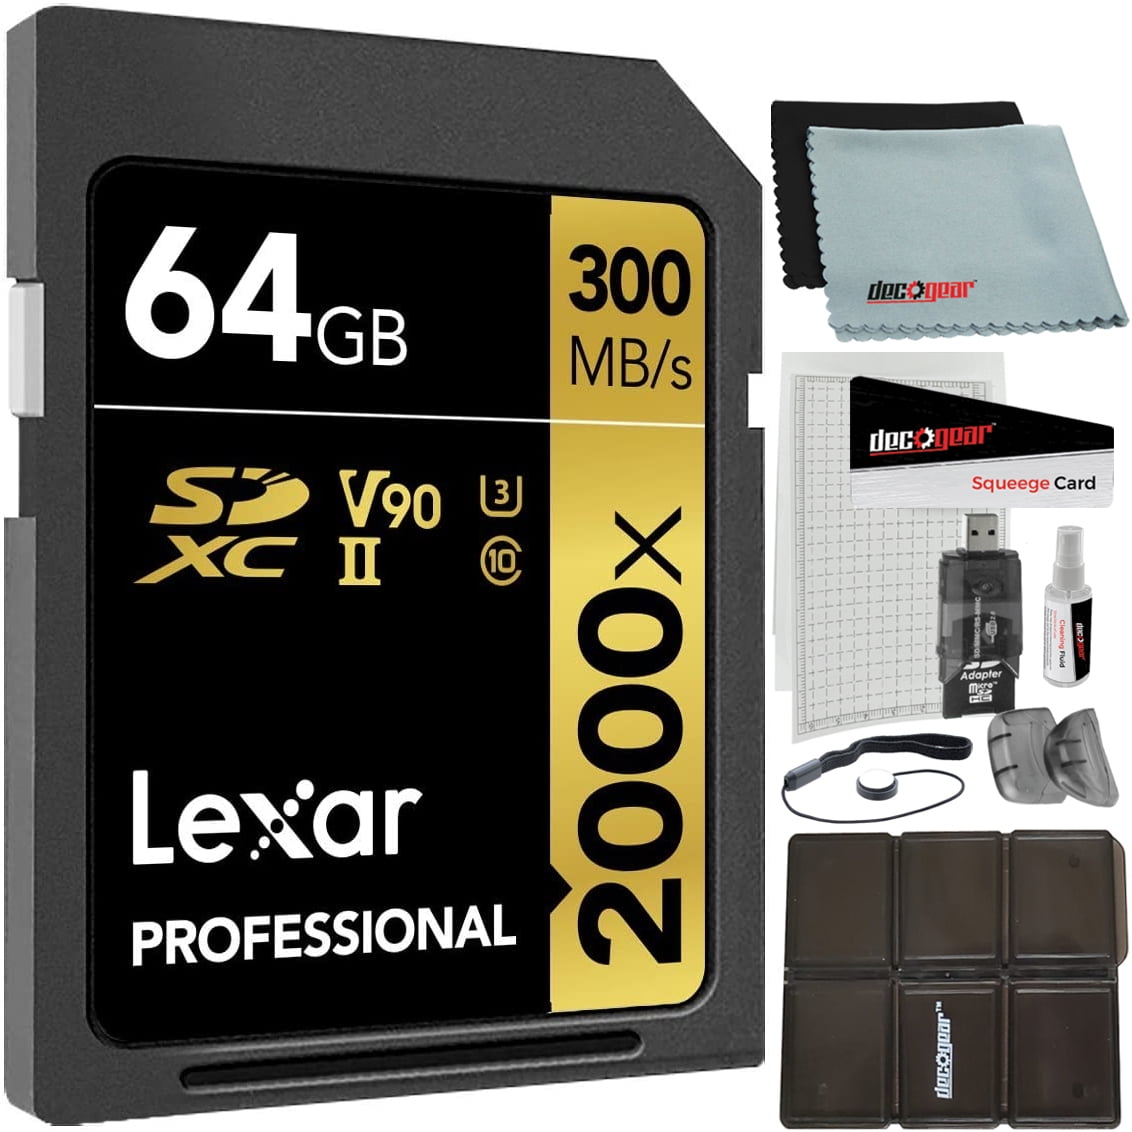 Lexar Professional 2000x 64GB SDXC UHS-II Memory Card Up to 300MB/s Read LSD2000064G-BNNNU) Bundle w/ Deco Gear Accessories Kit Including Reader   Case LCD Screen Covers Microfiber Cloth  More